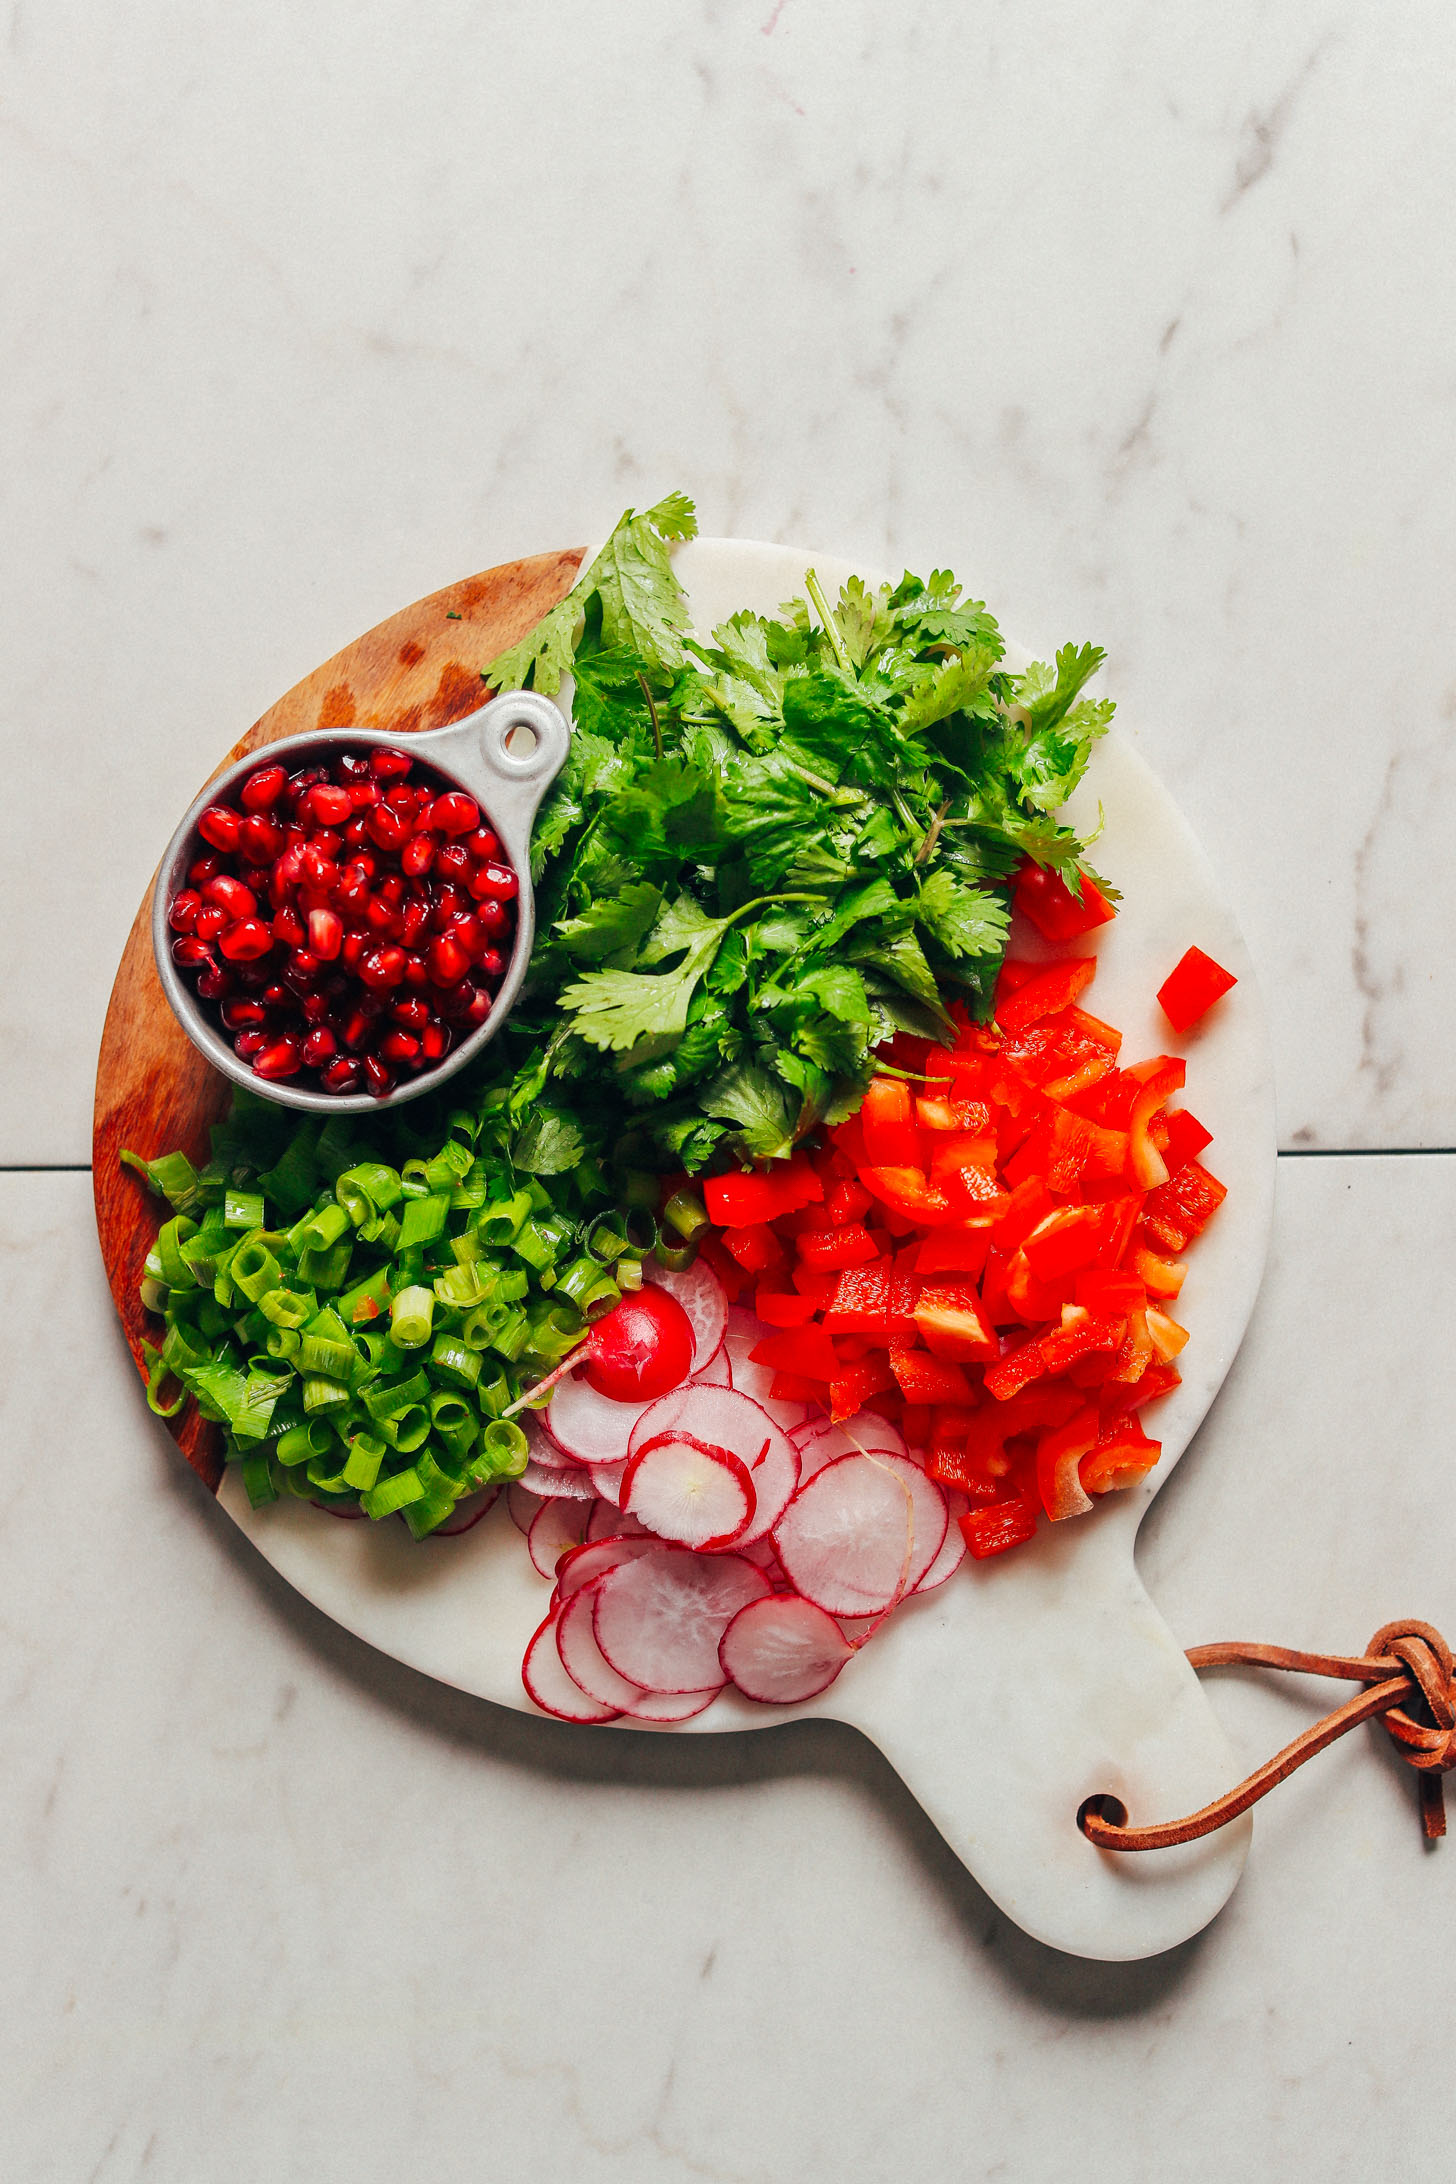 Freshness abounds in this photo of green onion, cilantro, pomegranate seeds, sliced radishes, and diced red bell pepper